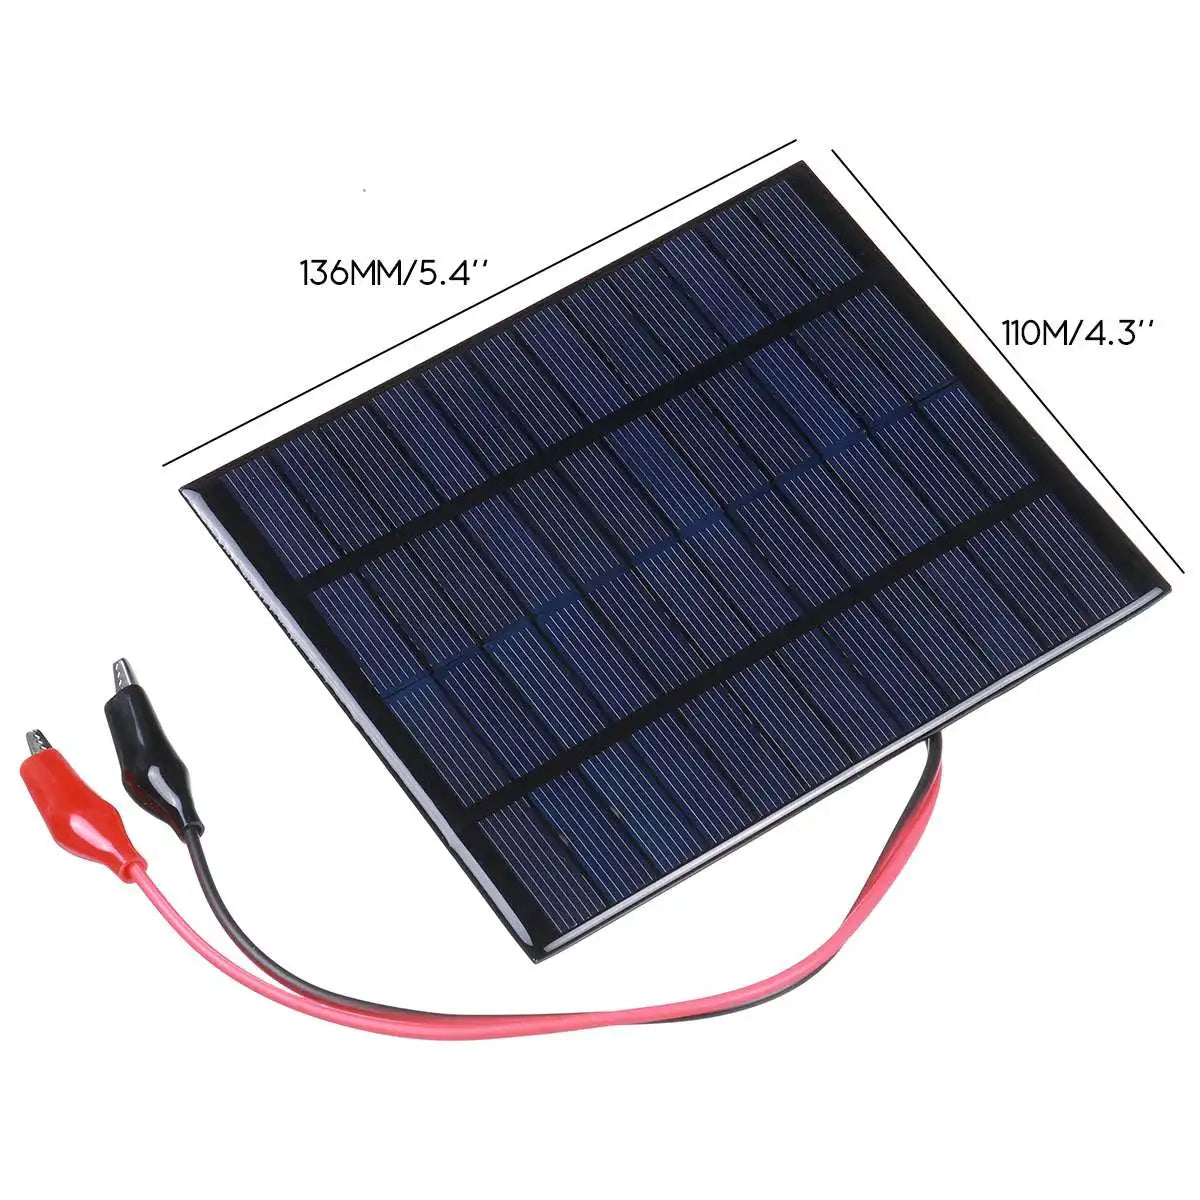 20W Solar Panel, This waterproof solar panel features durable materials for a long-lasting performance in outdoor environments.